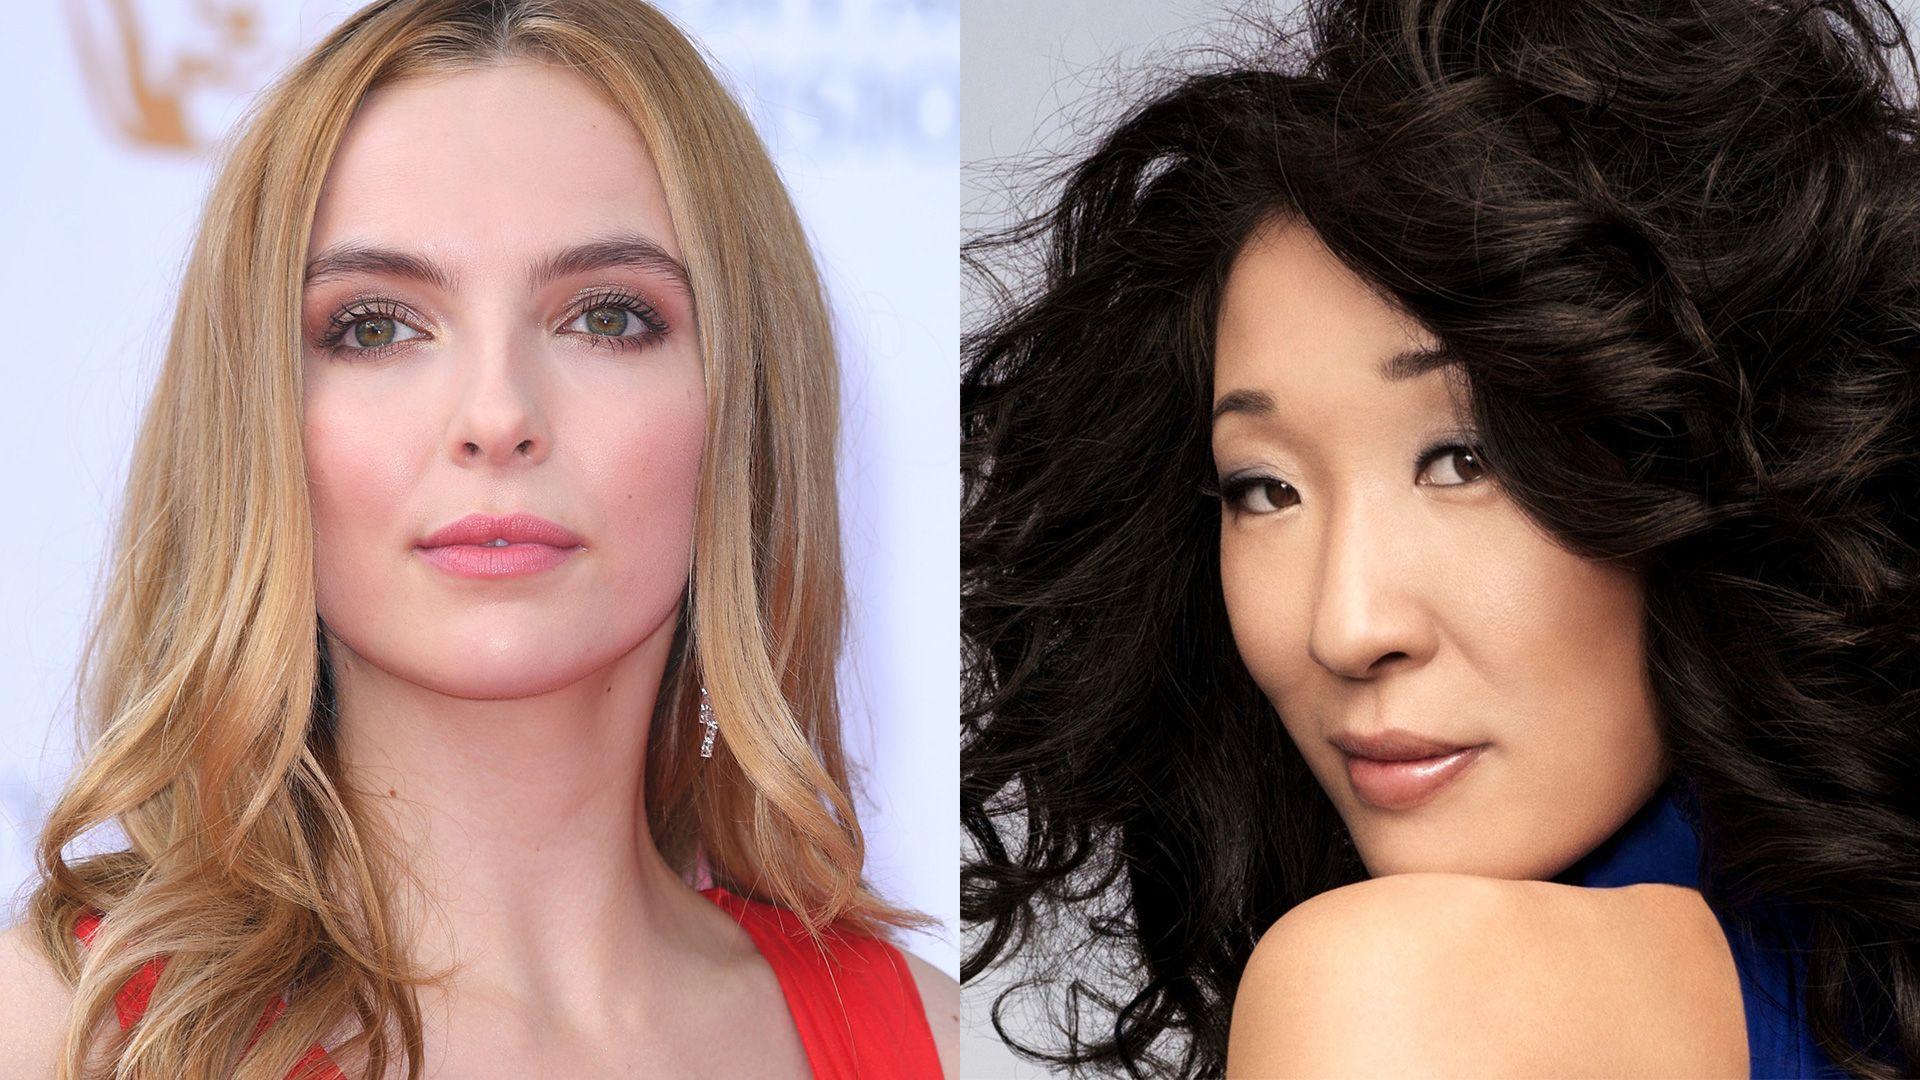 BBC America's New Thriller 'Killing Eve' Starts Filming in Europe